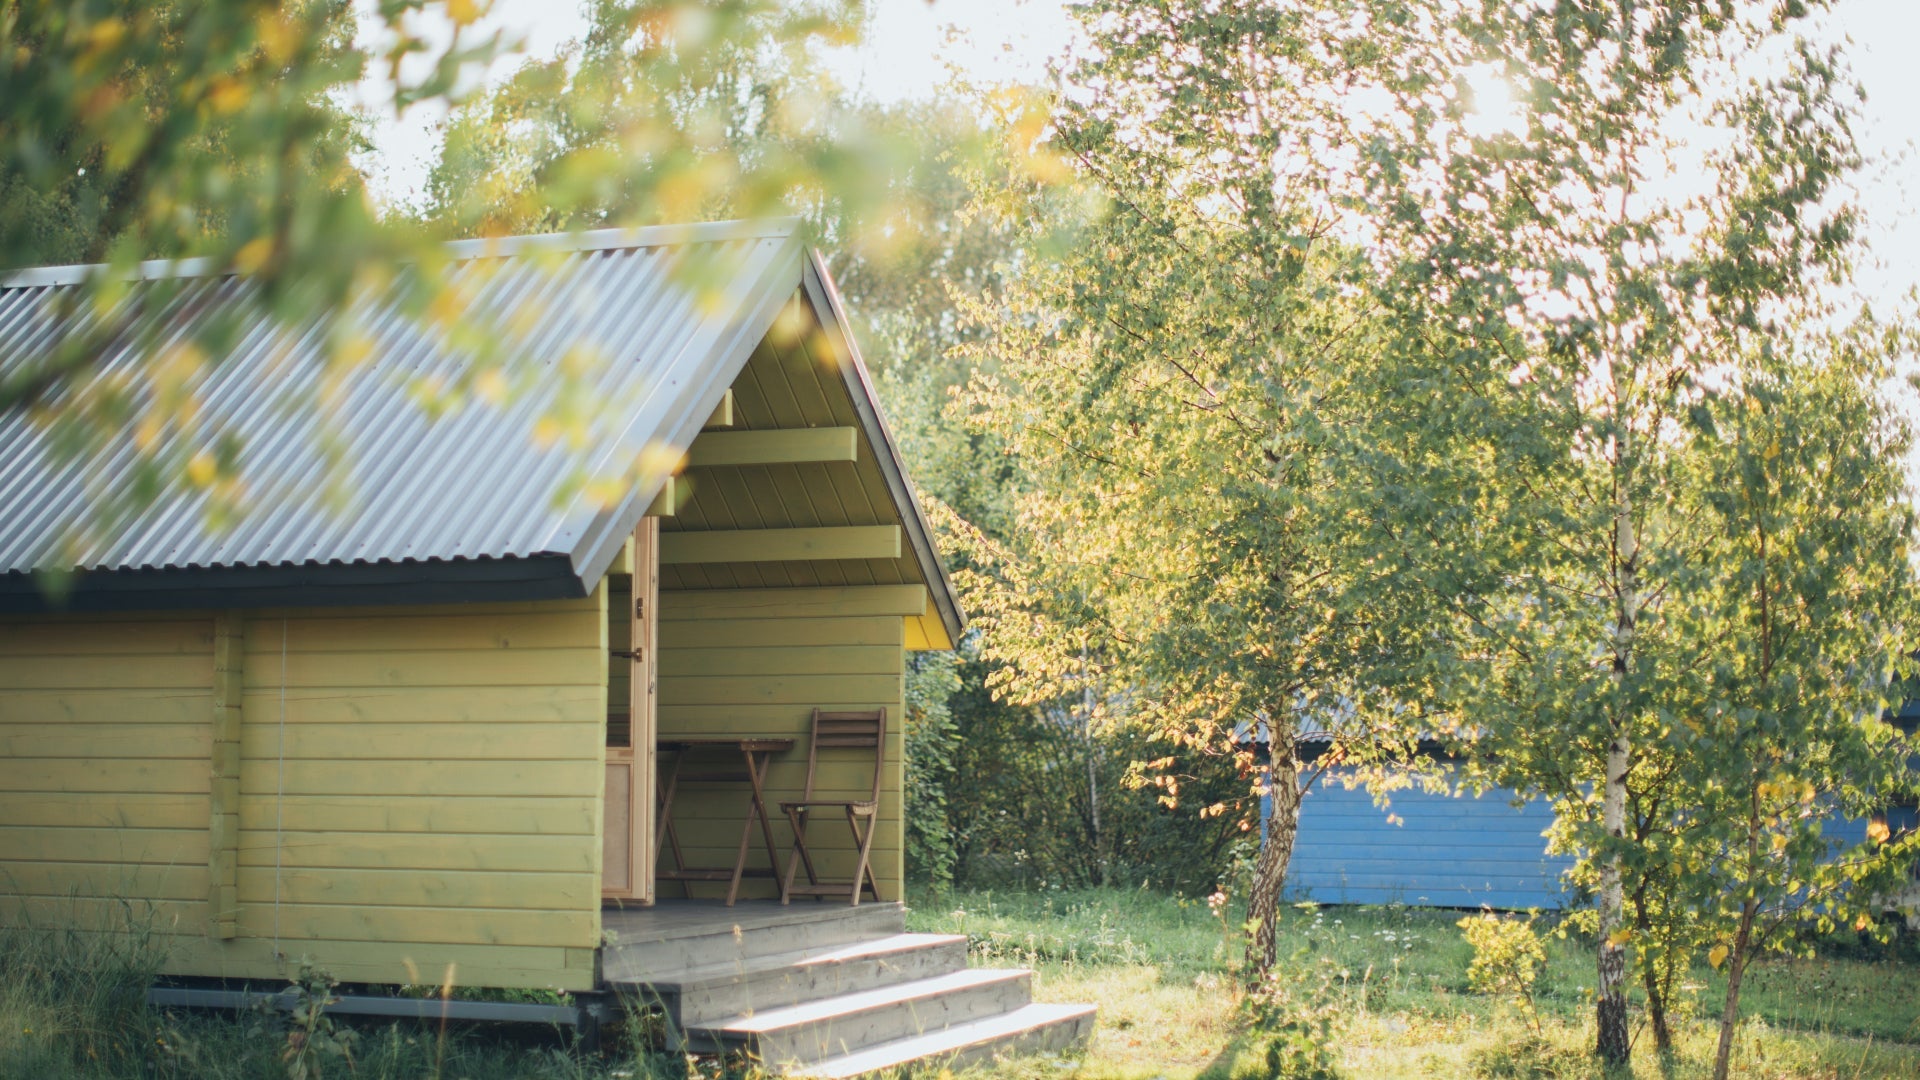 How to power your spare shed with solar energy